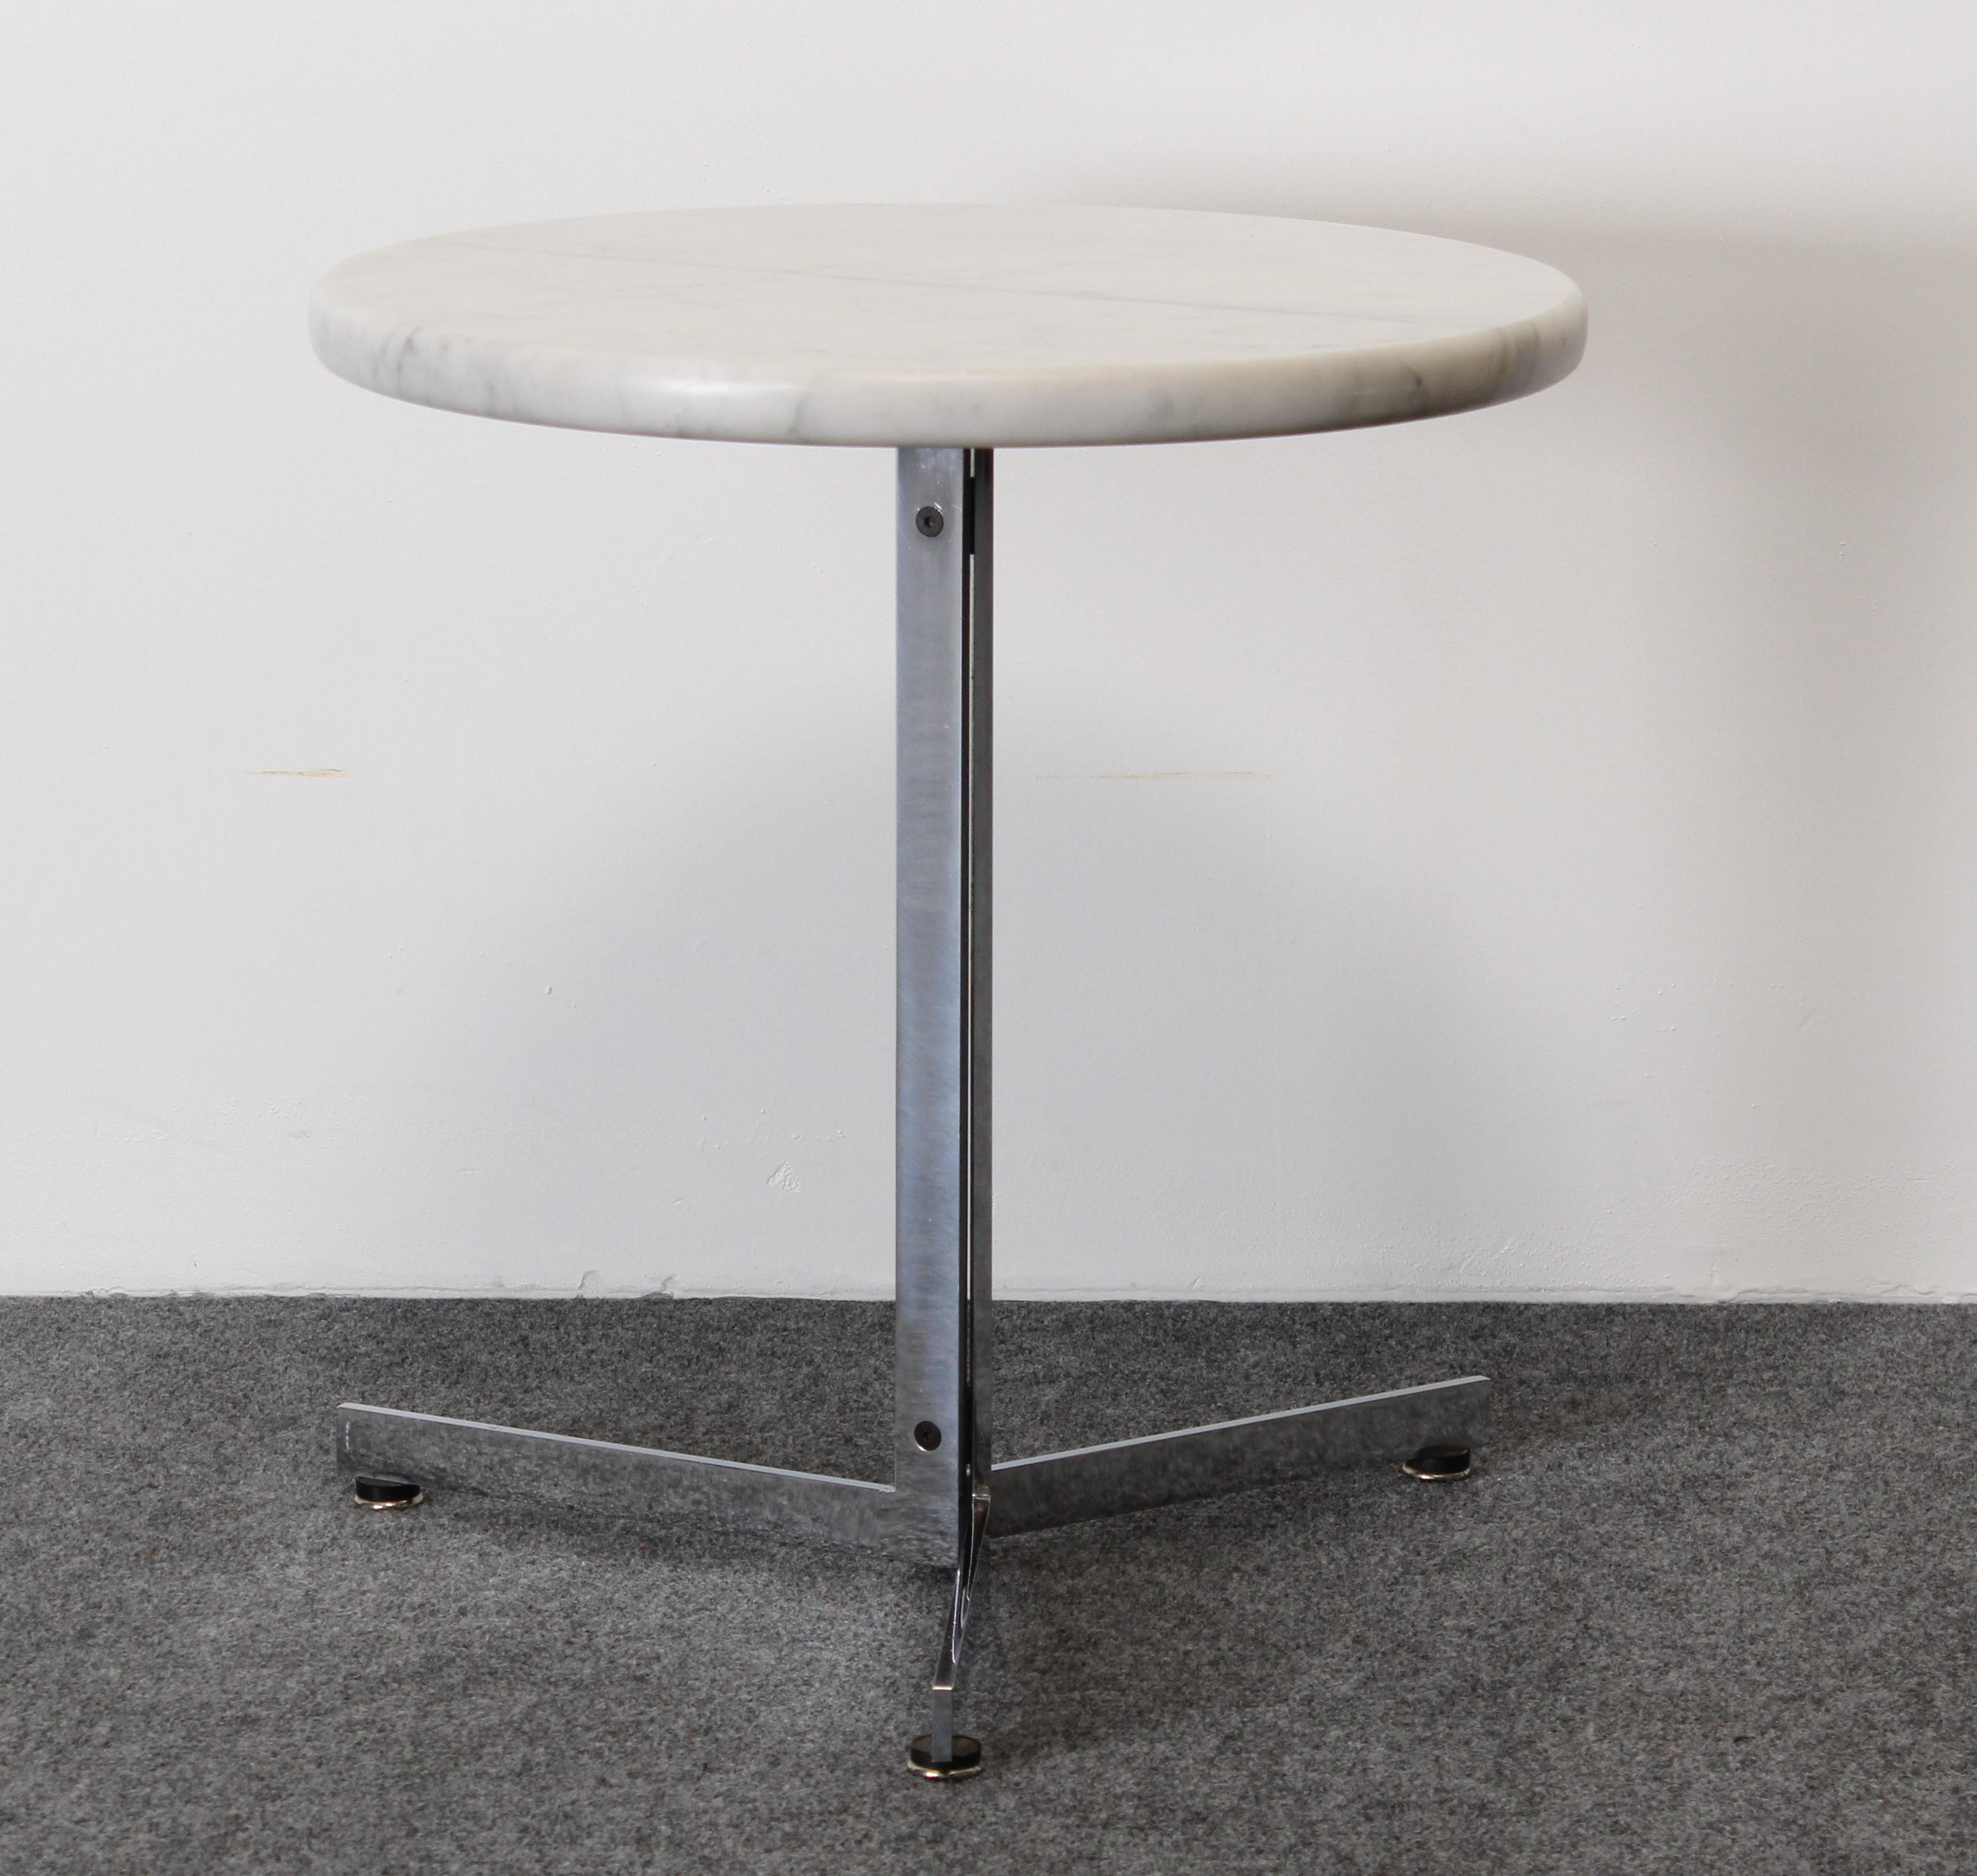 A timeless Mid-Century Modern designed side table by Hans Eichenberger for Stendig. 

Overall good condition, minor surface scratch as shown in images, however, not distracting.

Dimensions: Height: 21.25